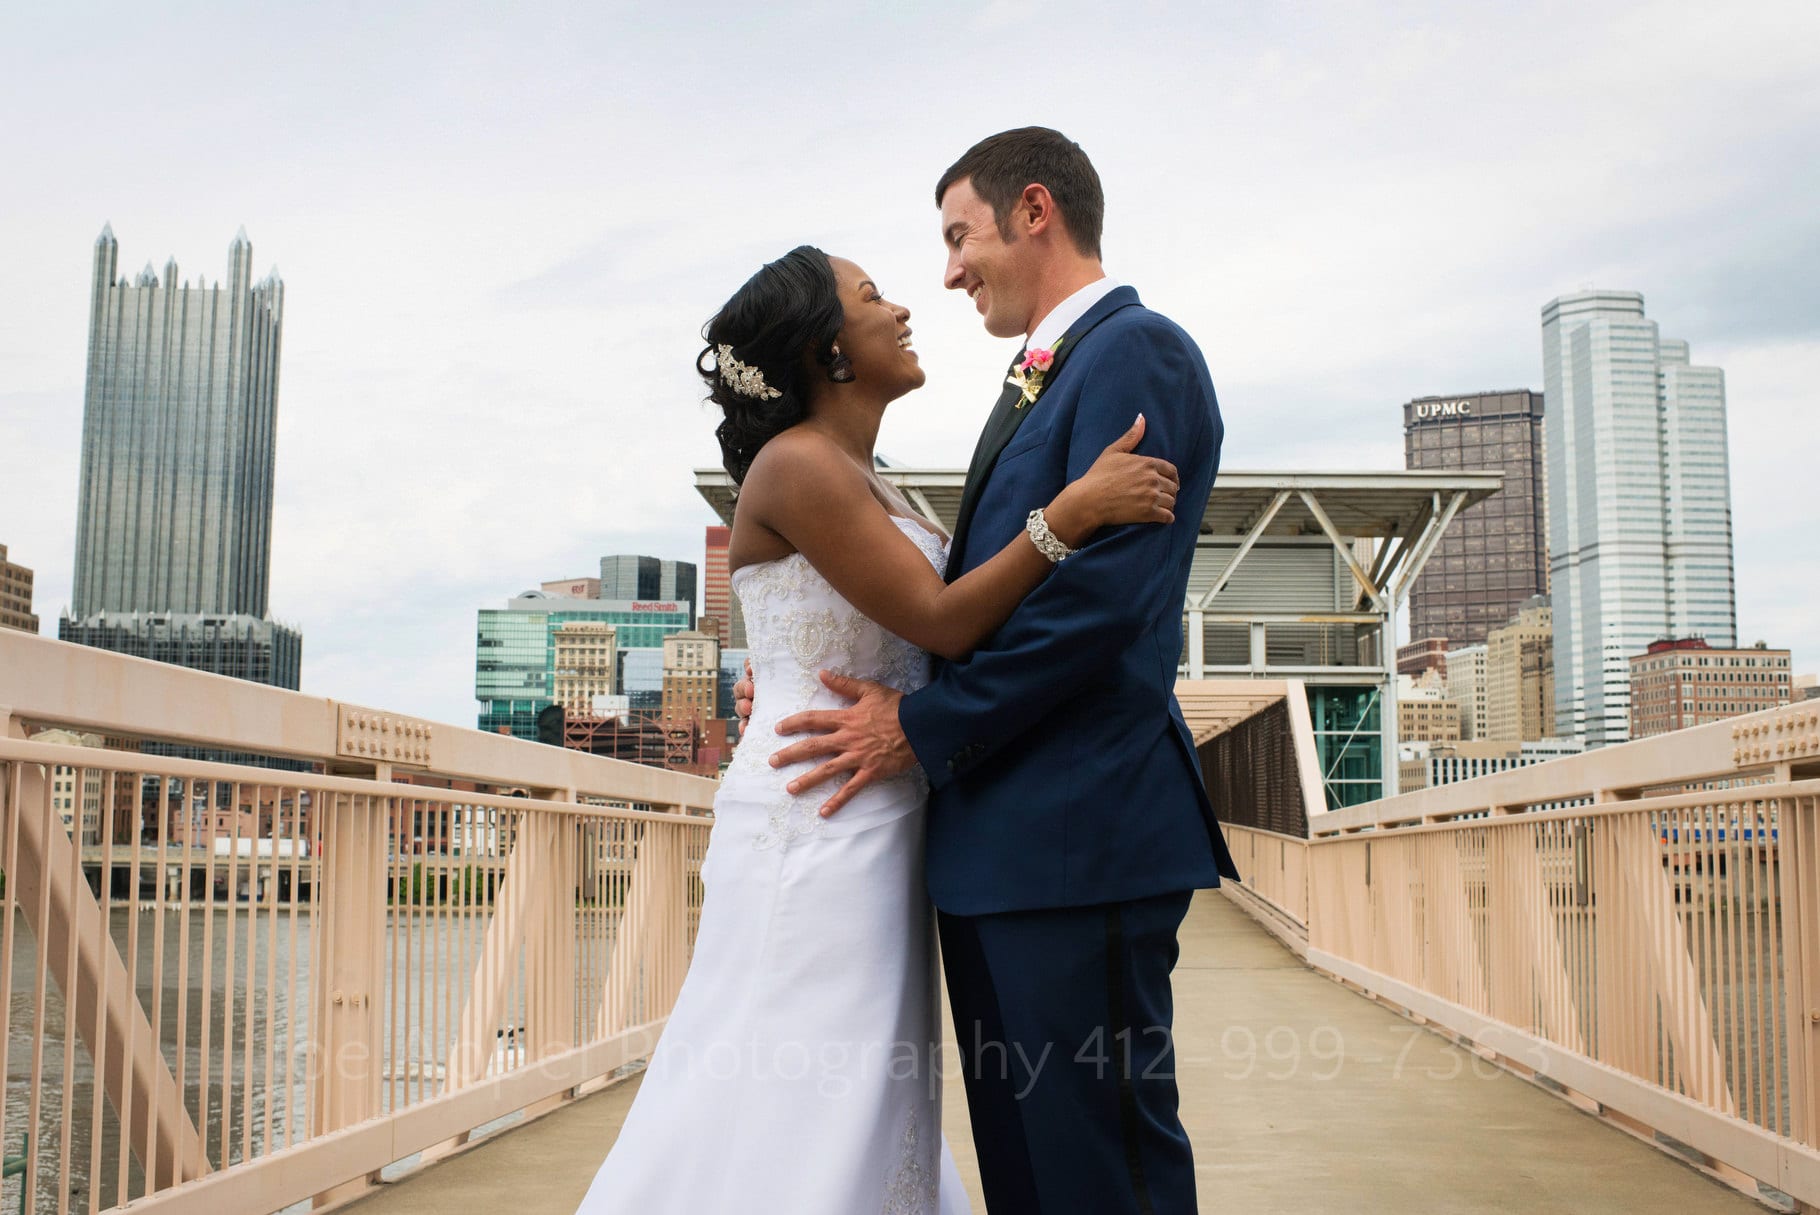 Bride and groom embrace on an elevated walkway at Station Square with the skyline of downtown Pittsburgh behind them.